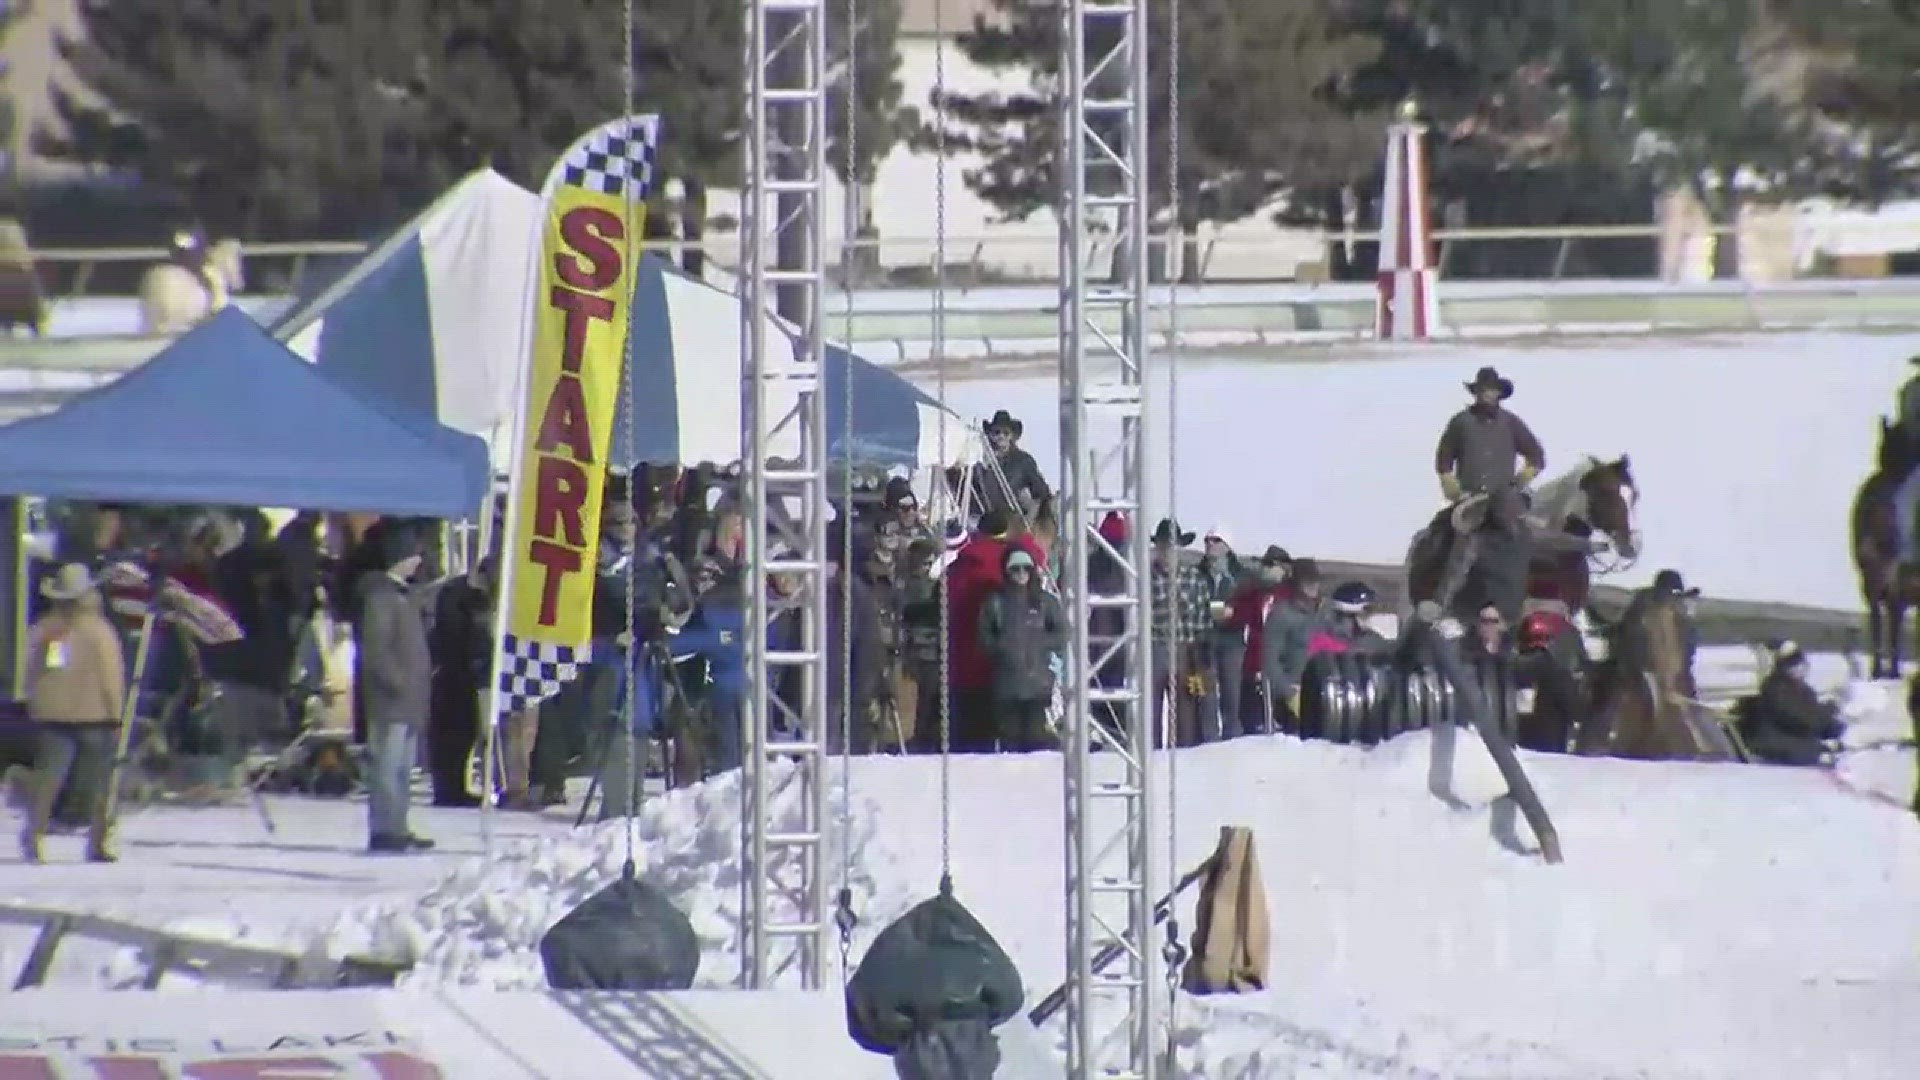 Skiers were pulled behind horses at speeds up to 40 miles per hour at Canterbury Park on Saturday for an "Extreme Horse Skijoring" event. http://kare11.tv/2szsRmv